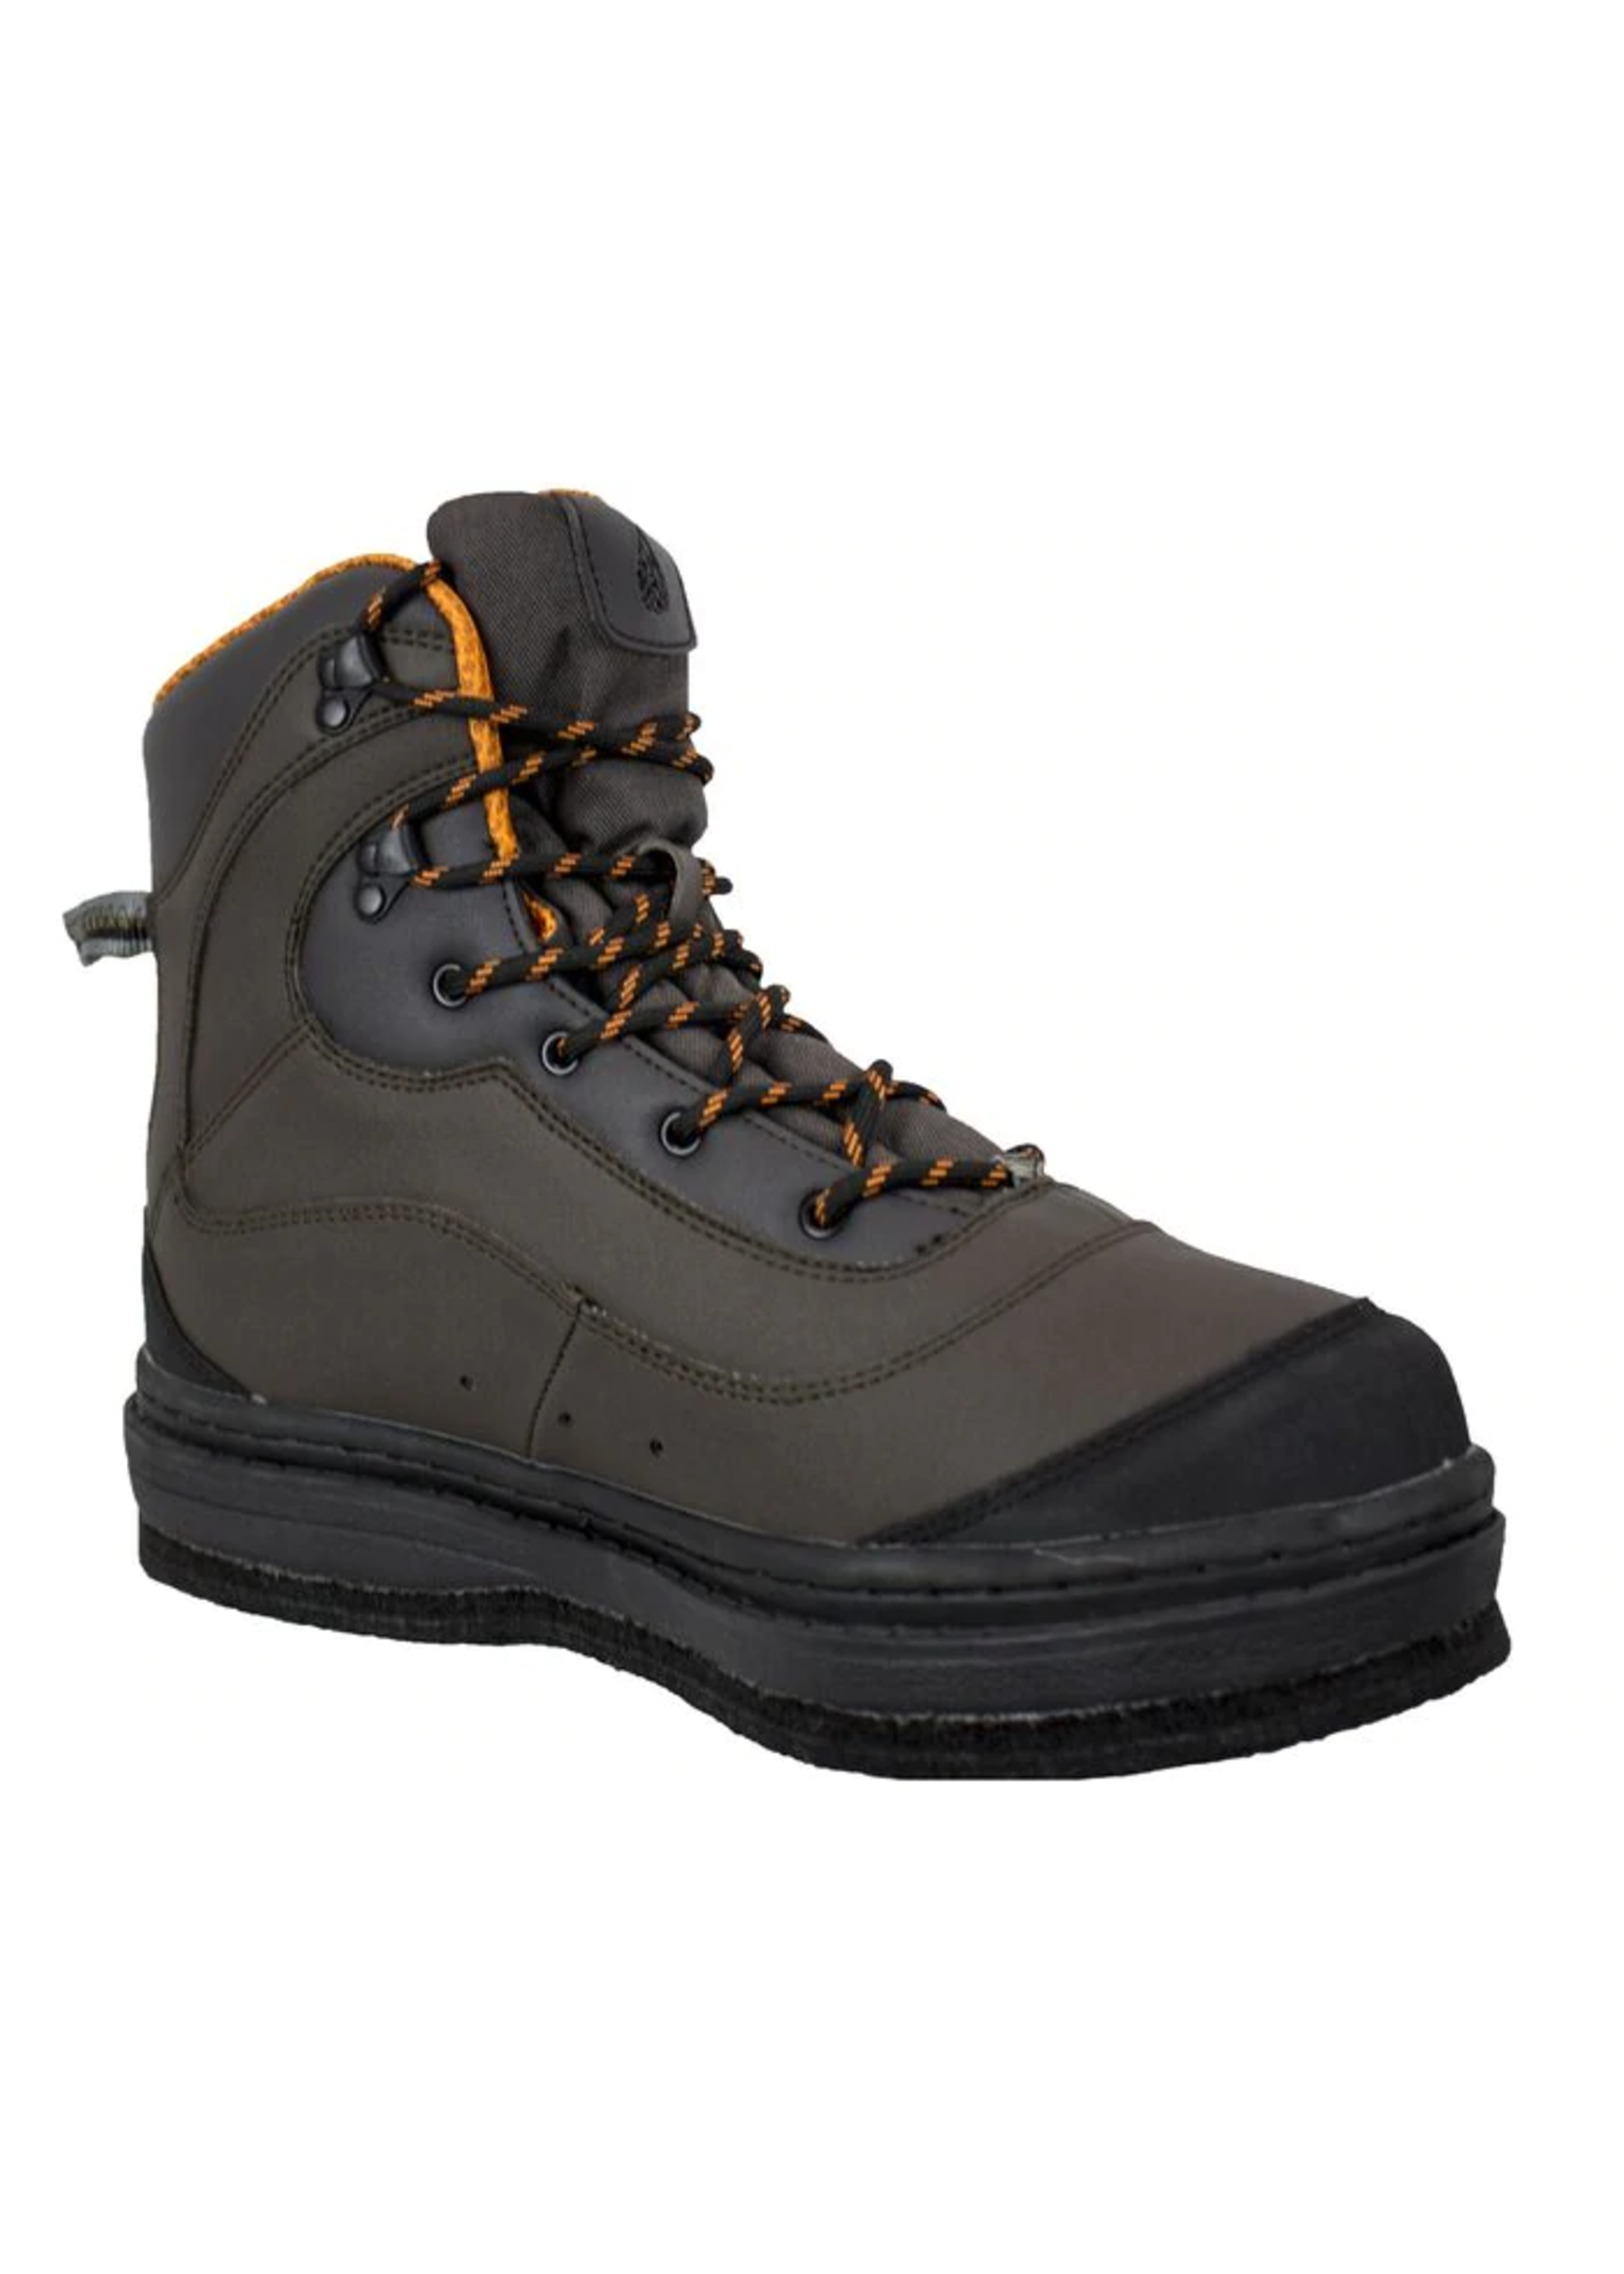 Compass 360 Compass 360 Tailwater II Felt Sole Wading Boots